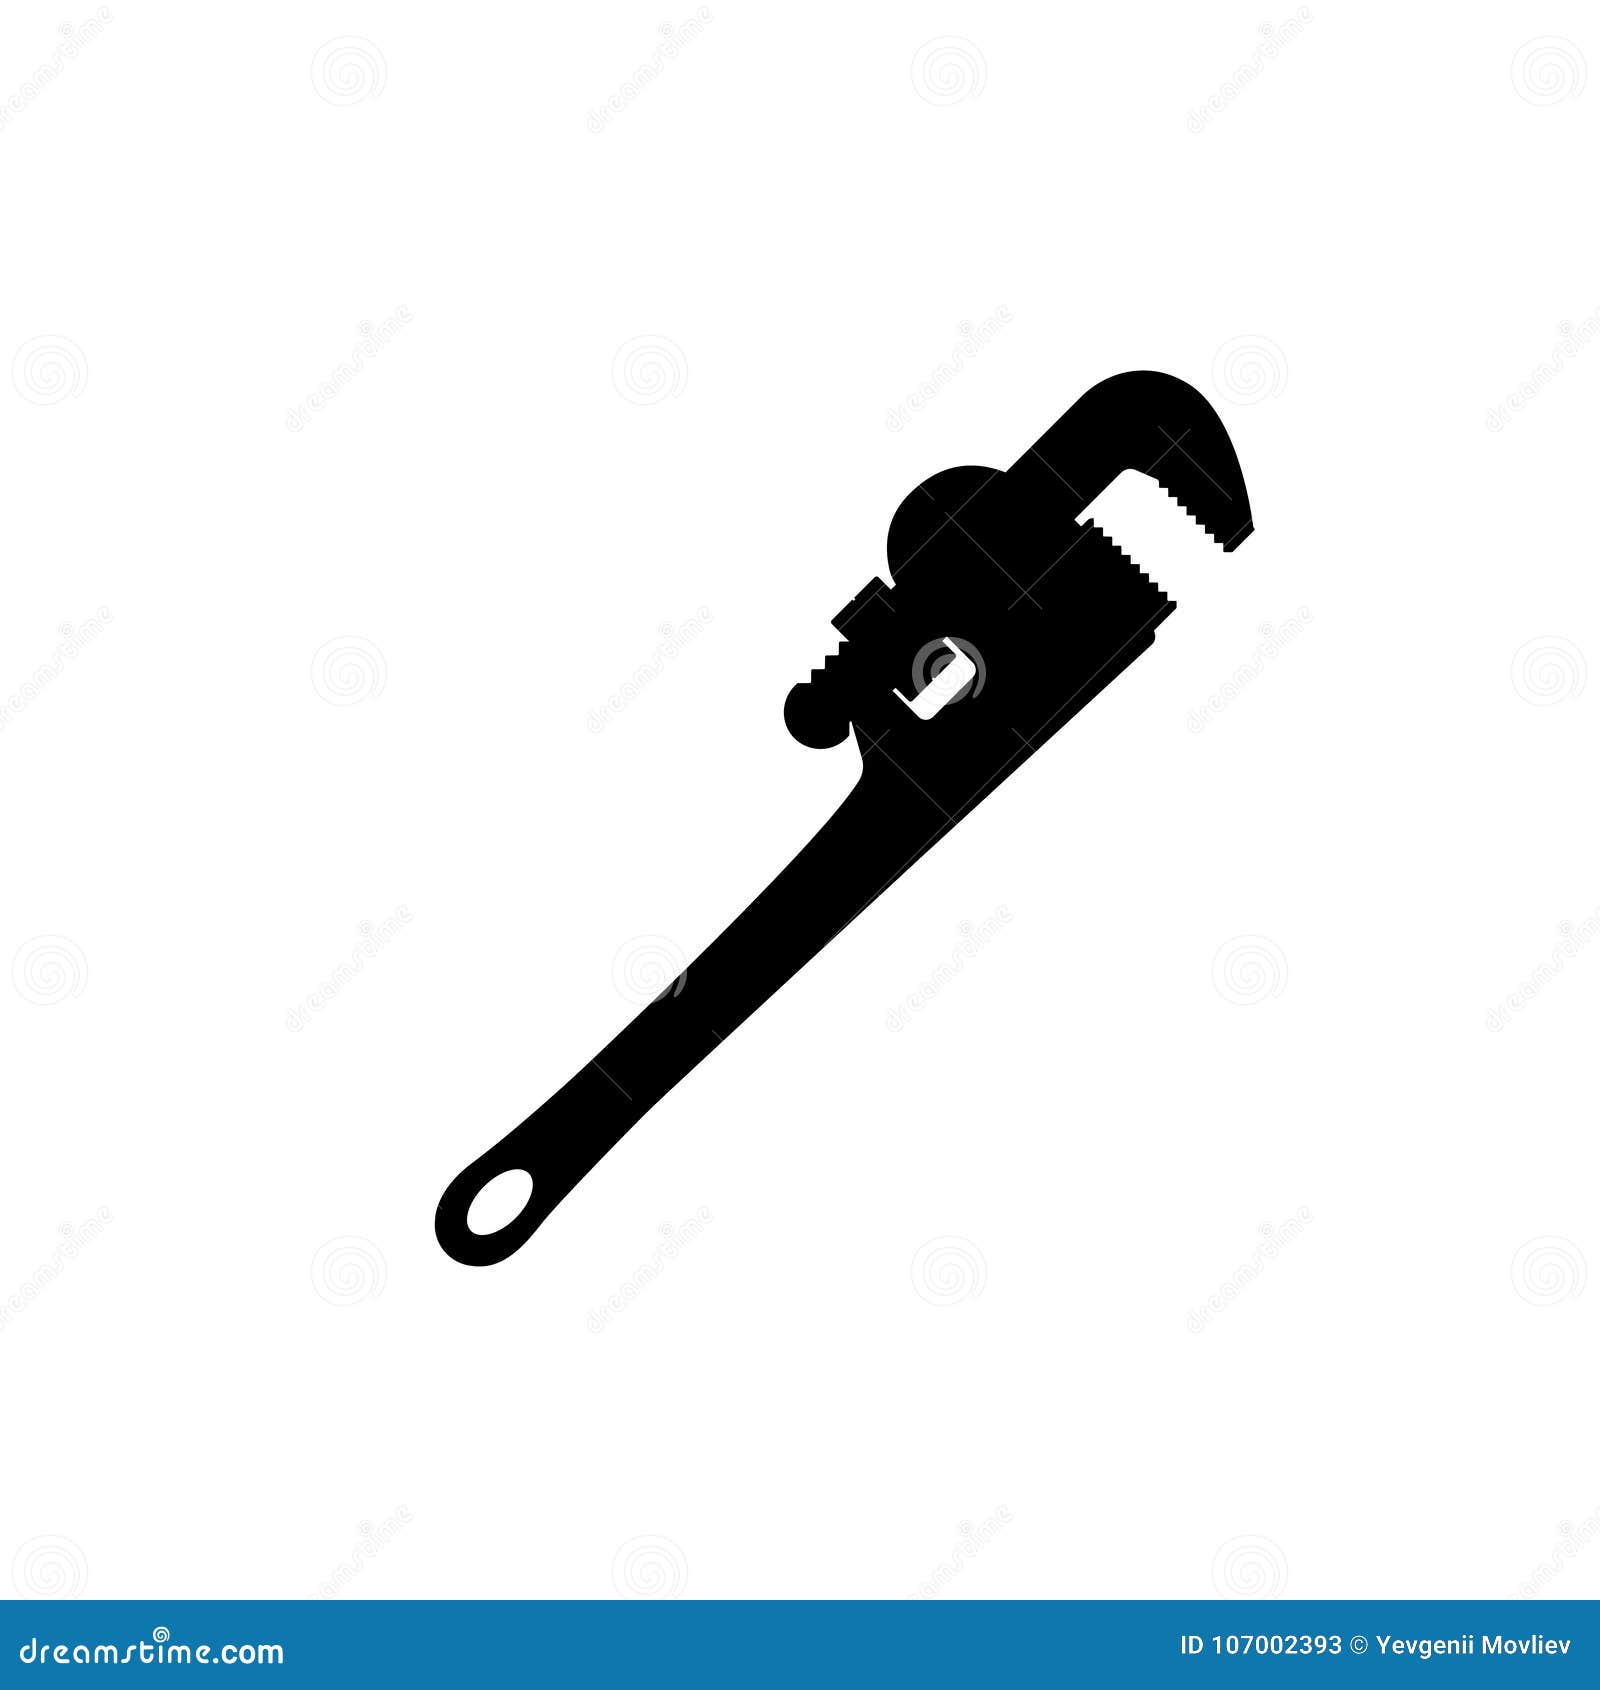 black silhouette of pipe wrench on white background.  drawing